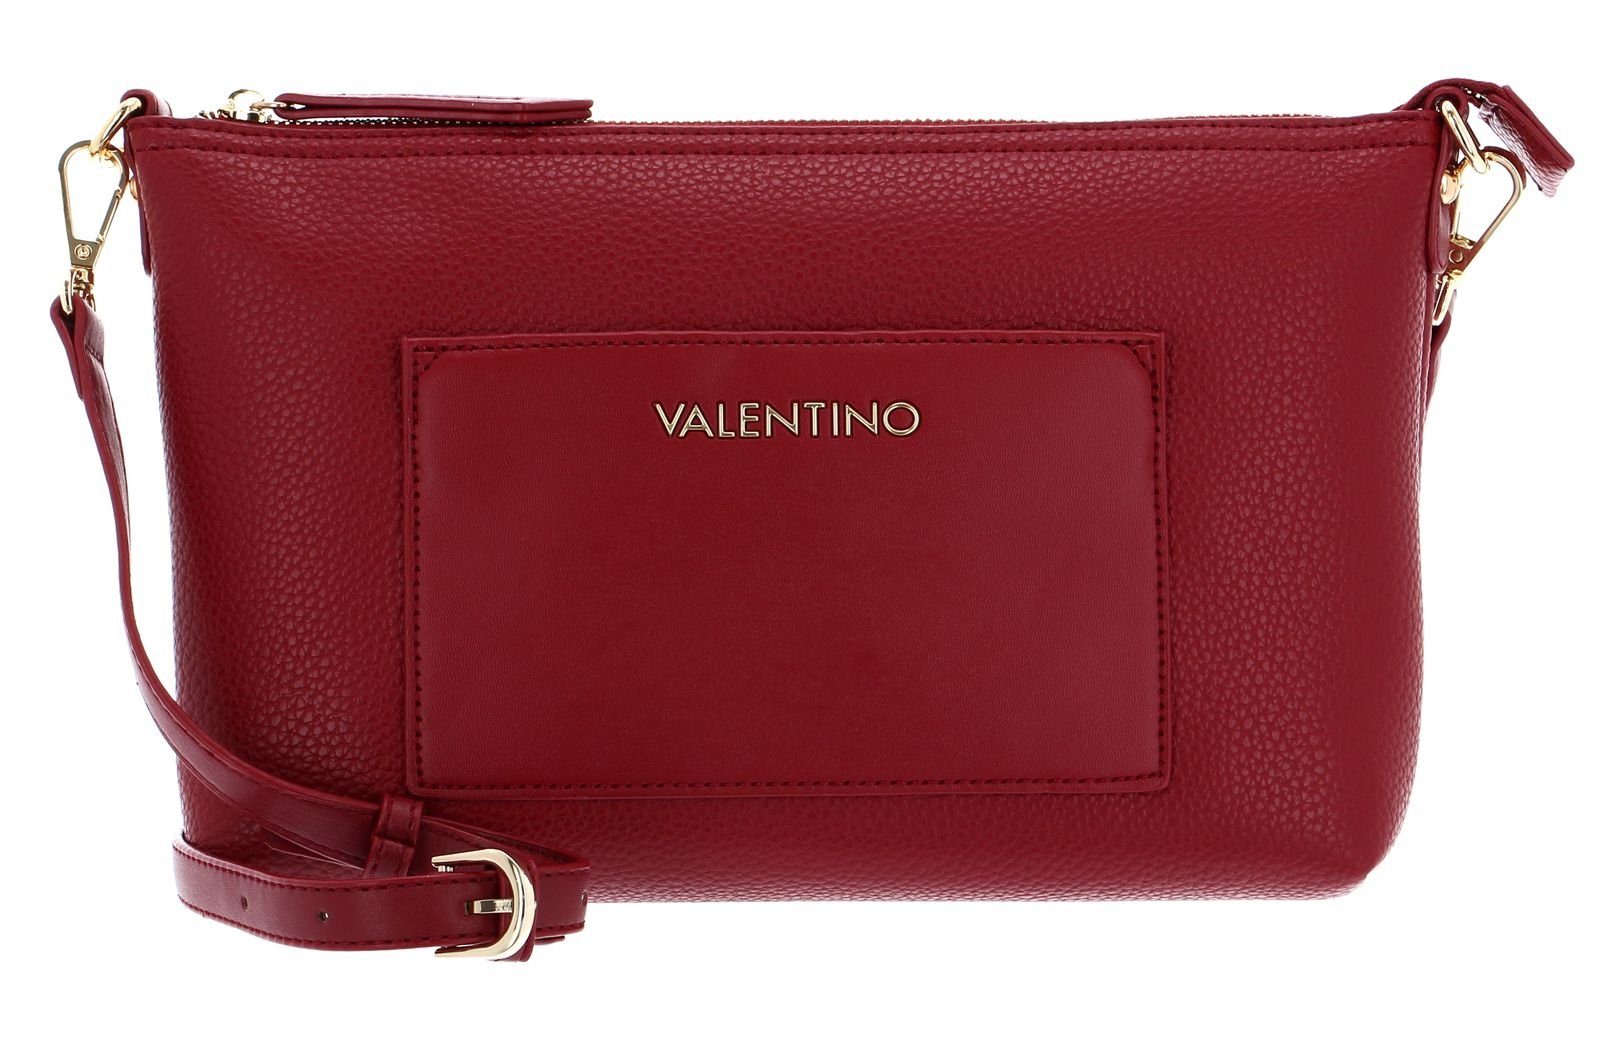 VALENTINO BAGS Clutch Willow Bordeaux